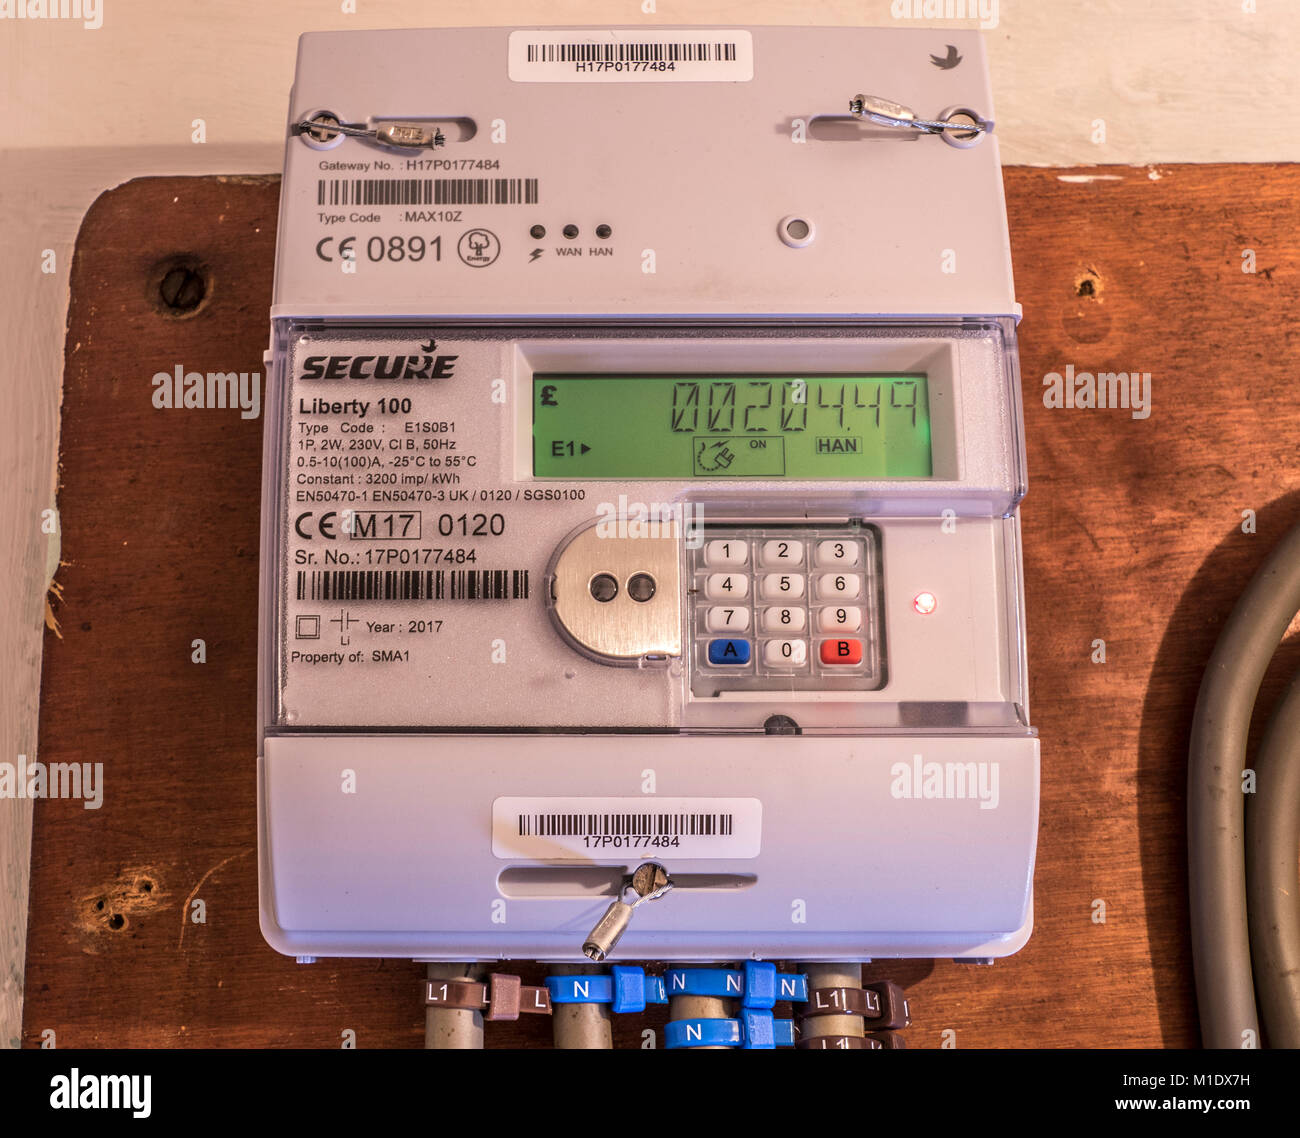 Secure Liberty 100 smart electricity meter, measuring consumption and relaying cost information in pounds sterling, via the display panel. UK. Stock Photo